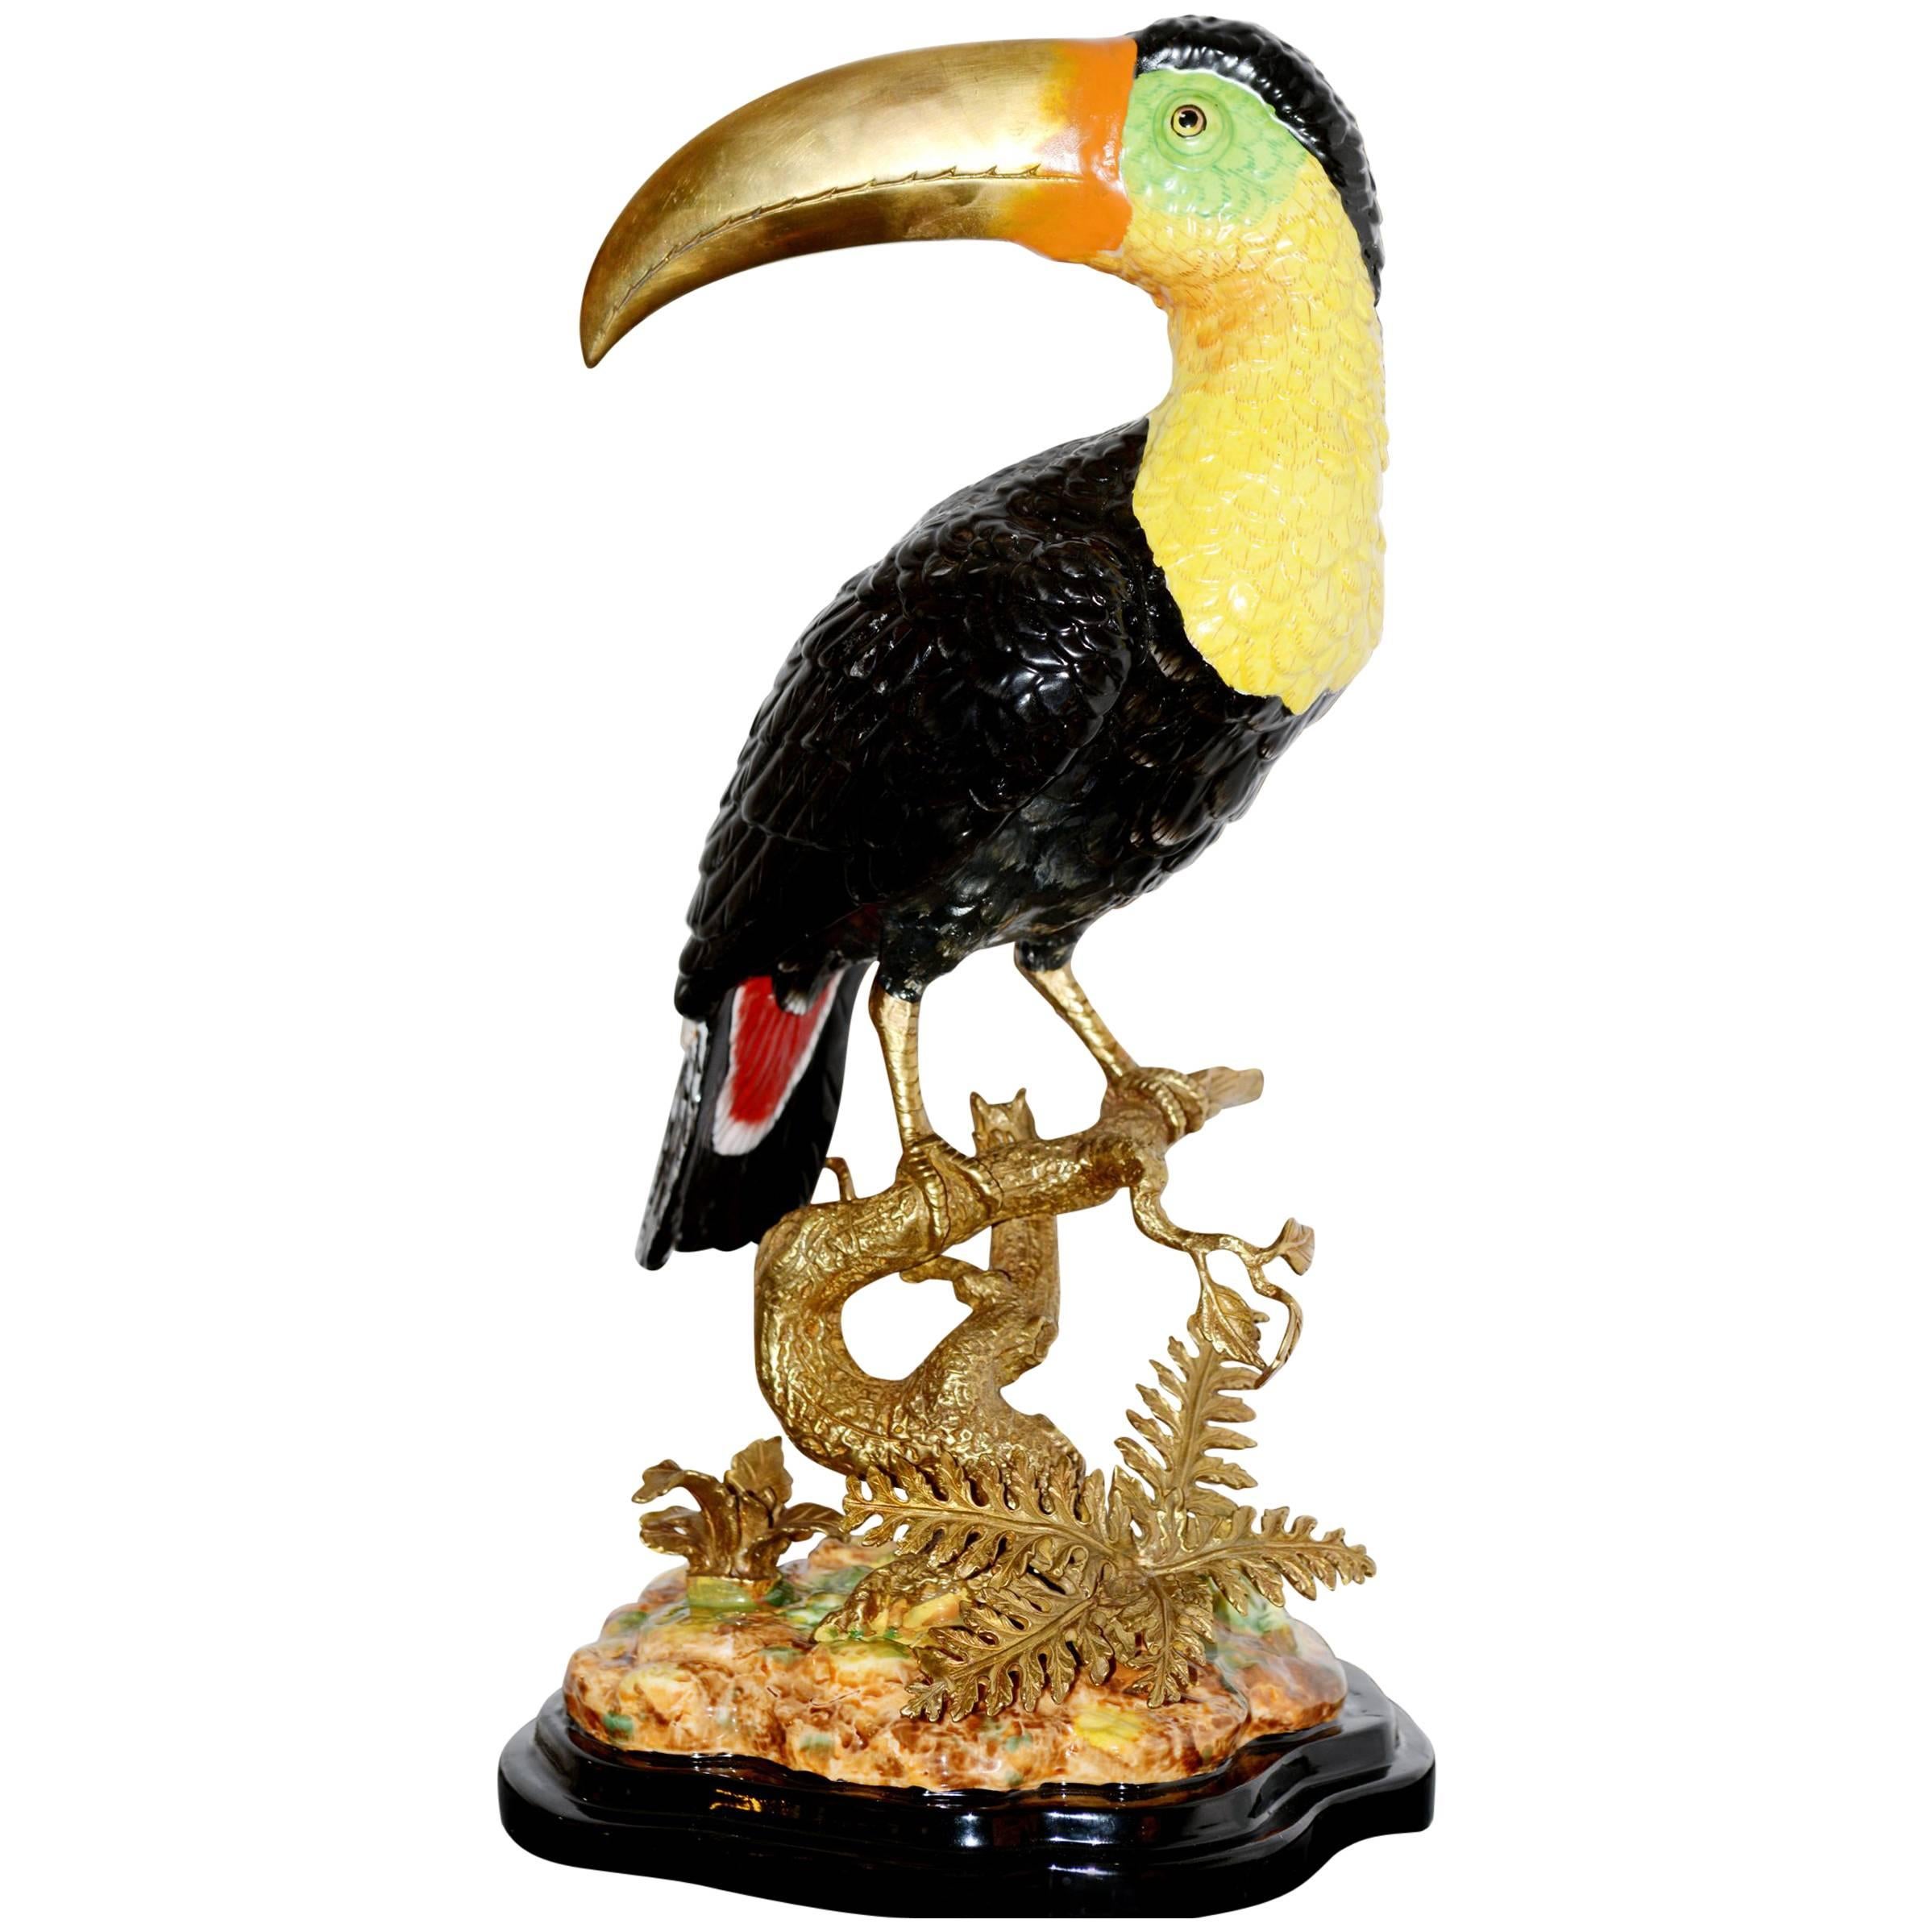 Toucan Sculpture in Solid Porcelain Hand-Painted Finish and Solid Bronze